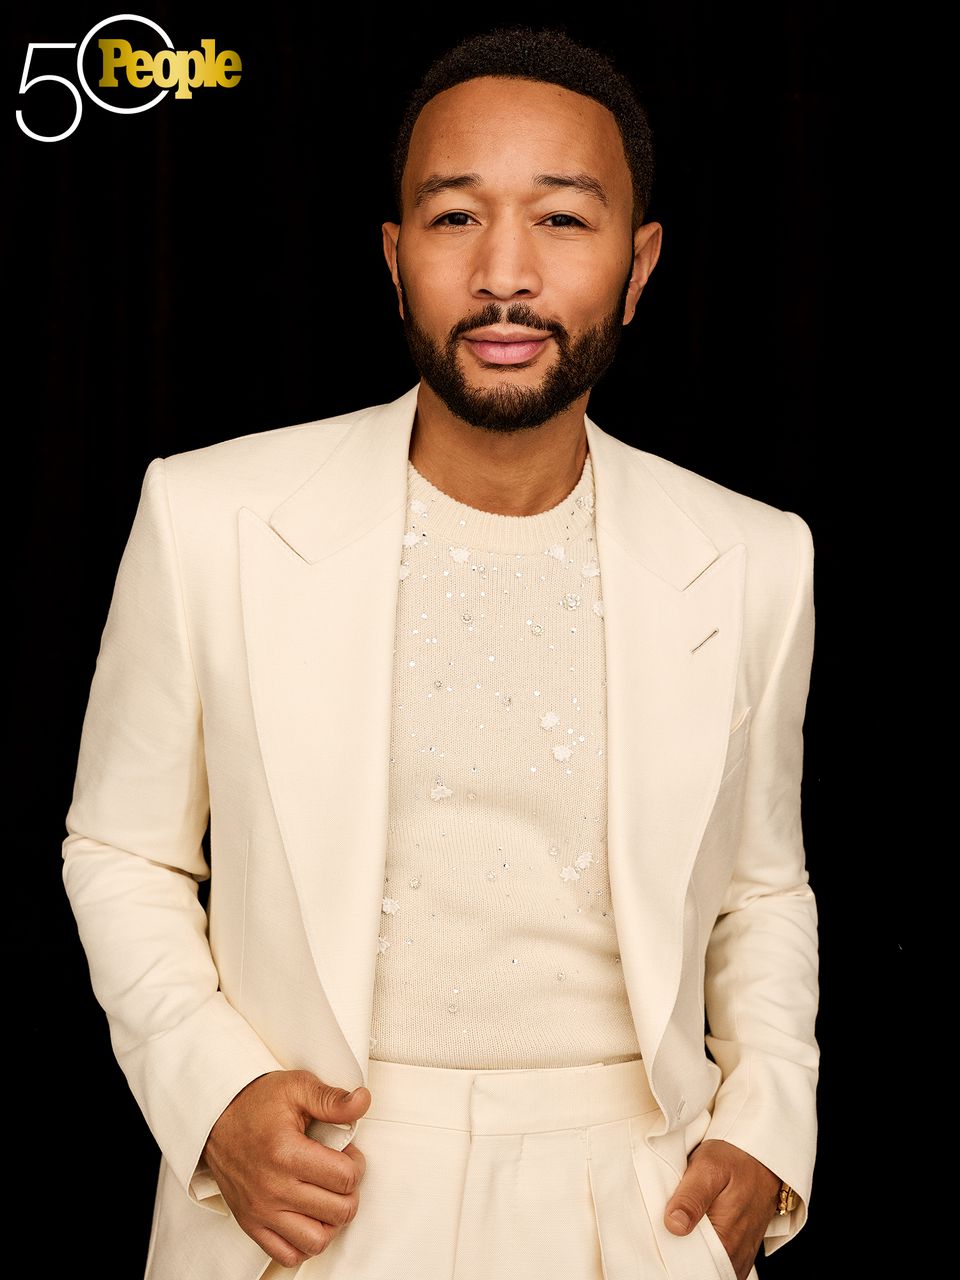 People 50th Anniversary JOHN LEGEND Photographed 3/8/24 at Smashbox Studios in Culver City, CA.